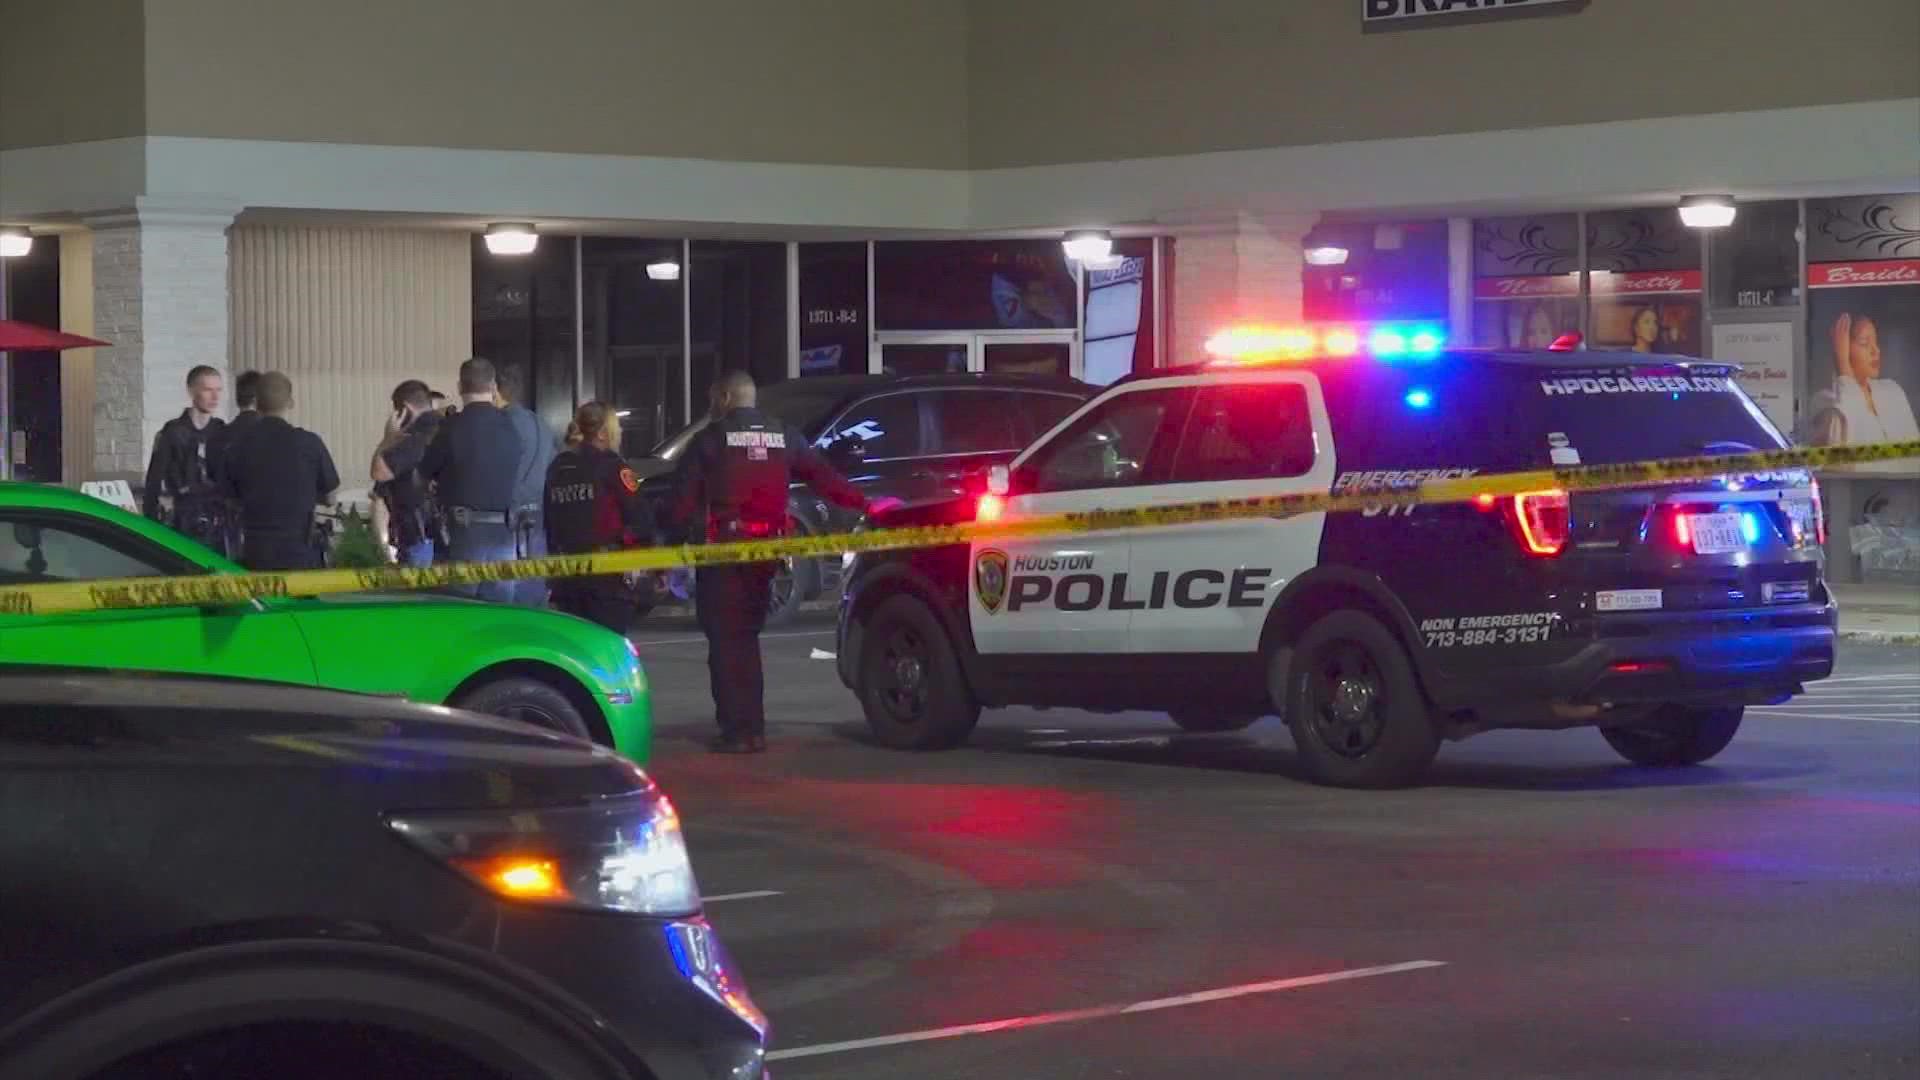 The man went to his car to get a gun, but was killed by the security guard who also had a gun.